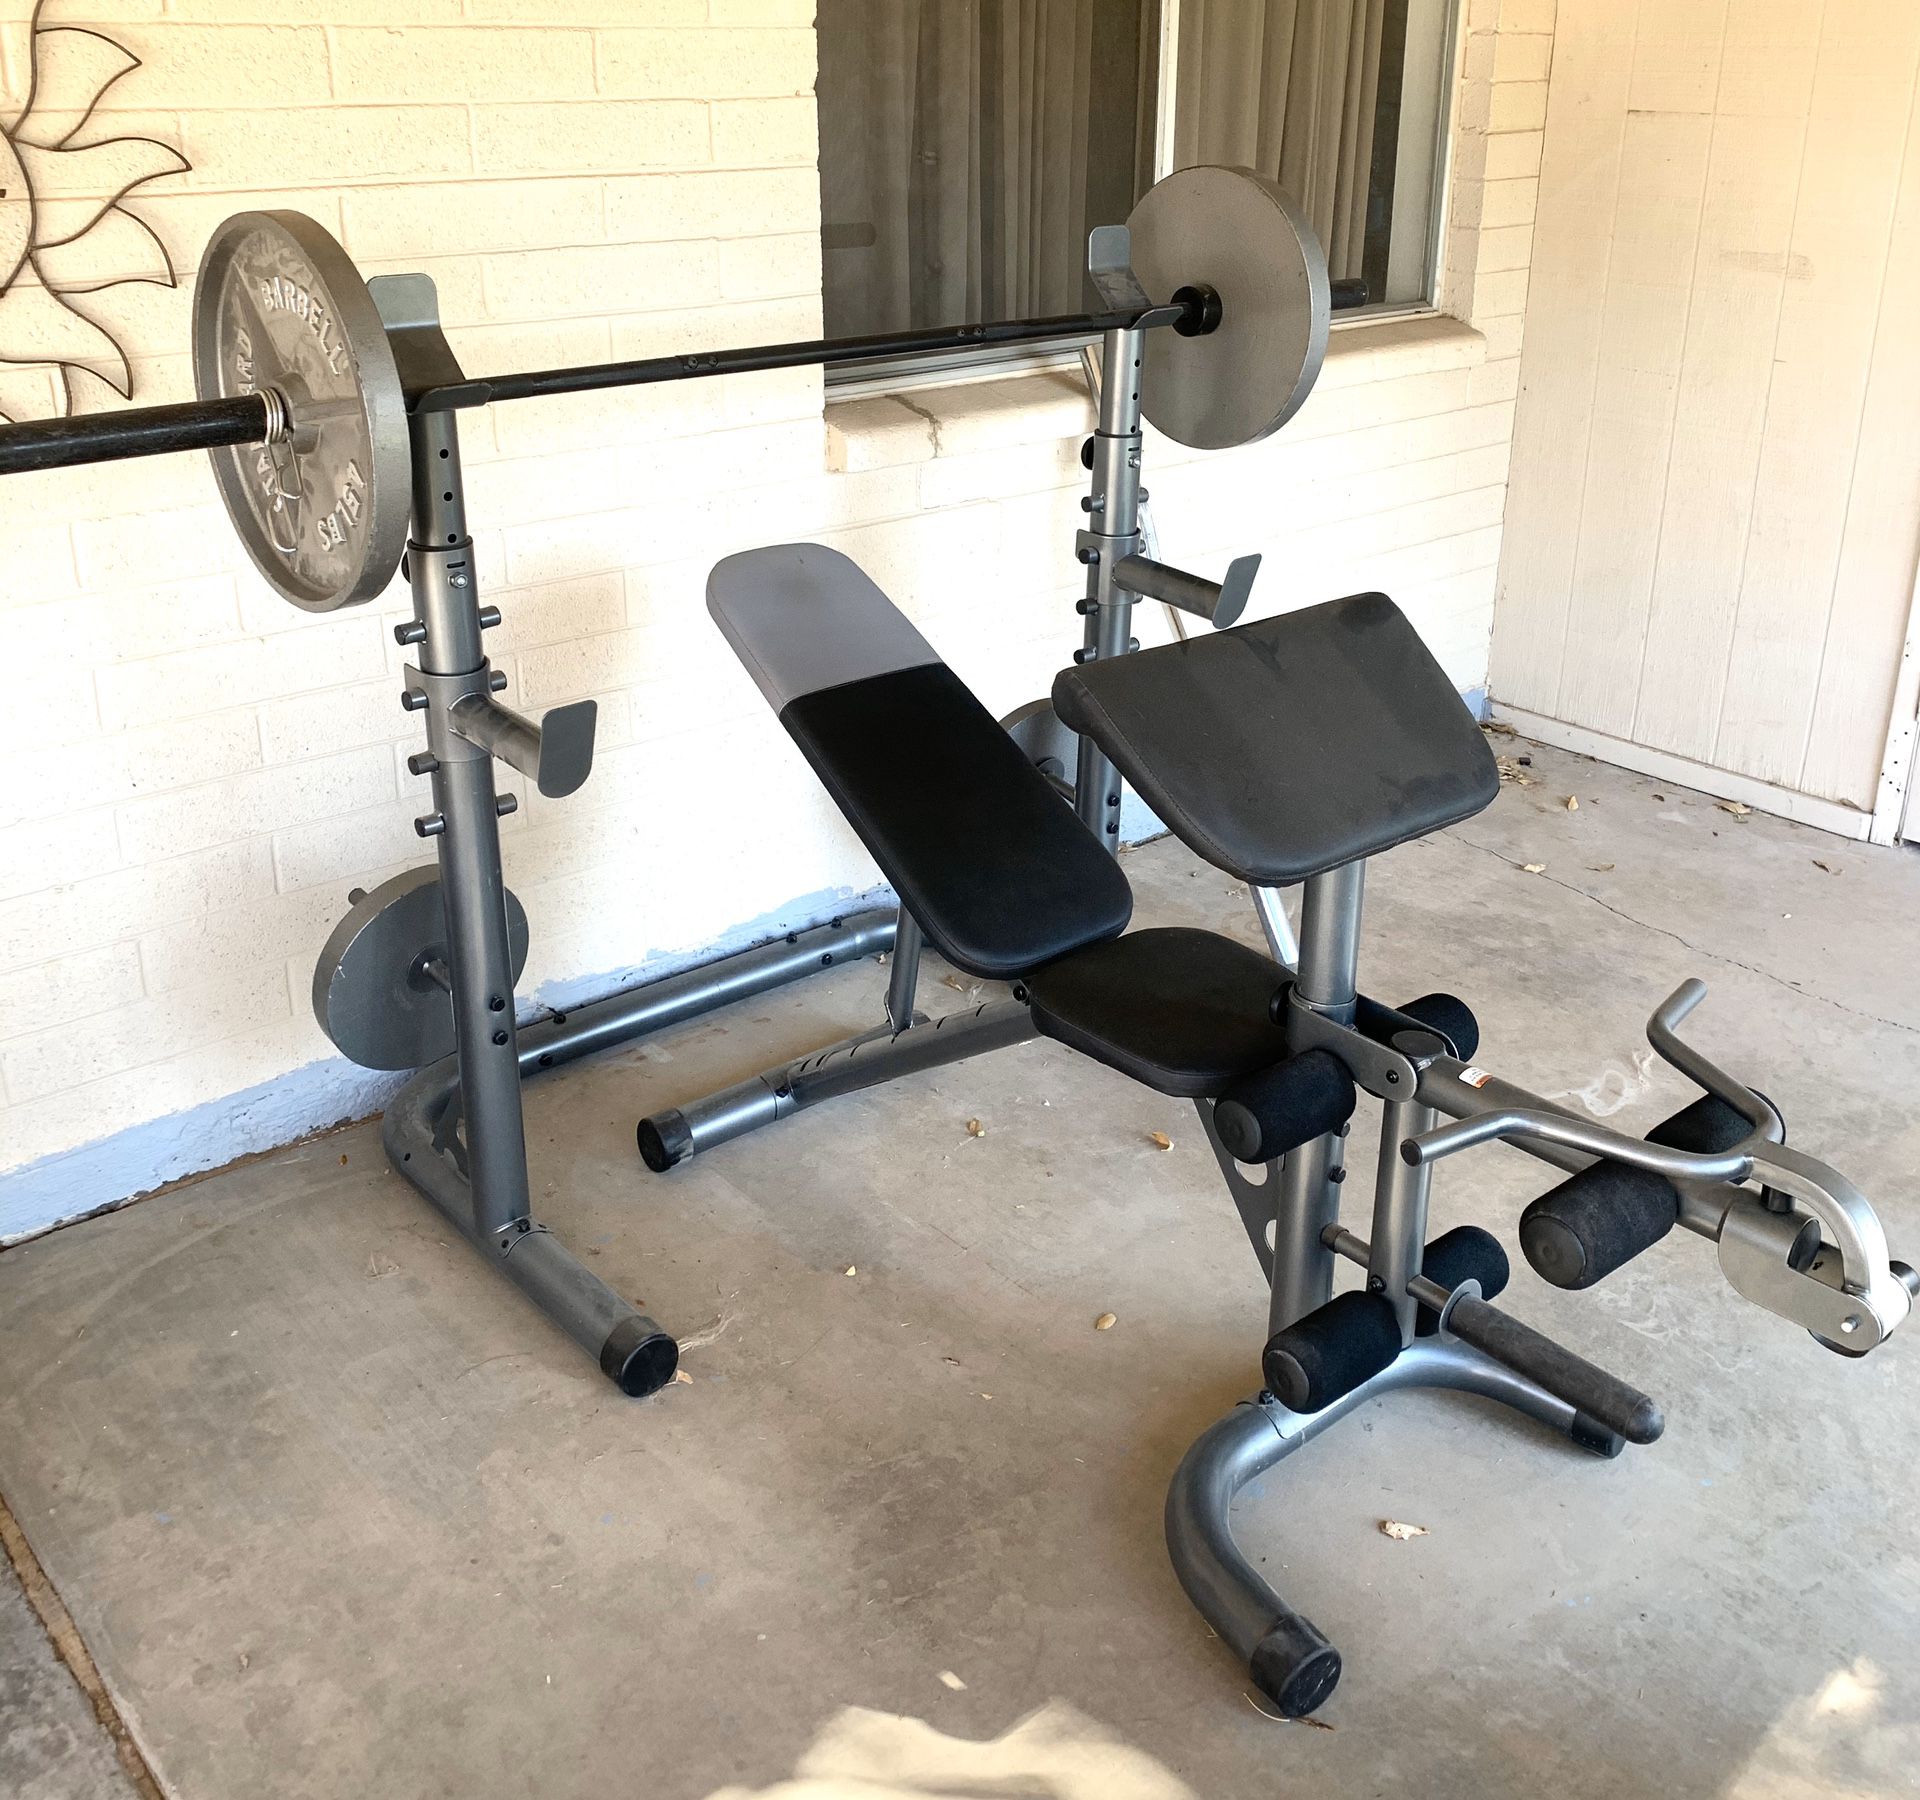 Home Gym - Squat Rack, Adjustable Bench, Olympic Weights